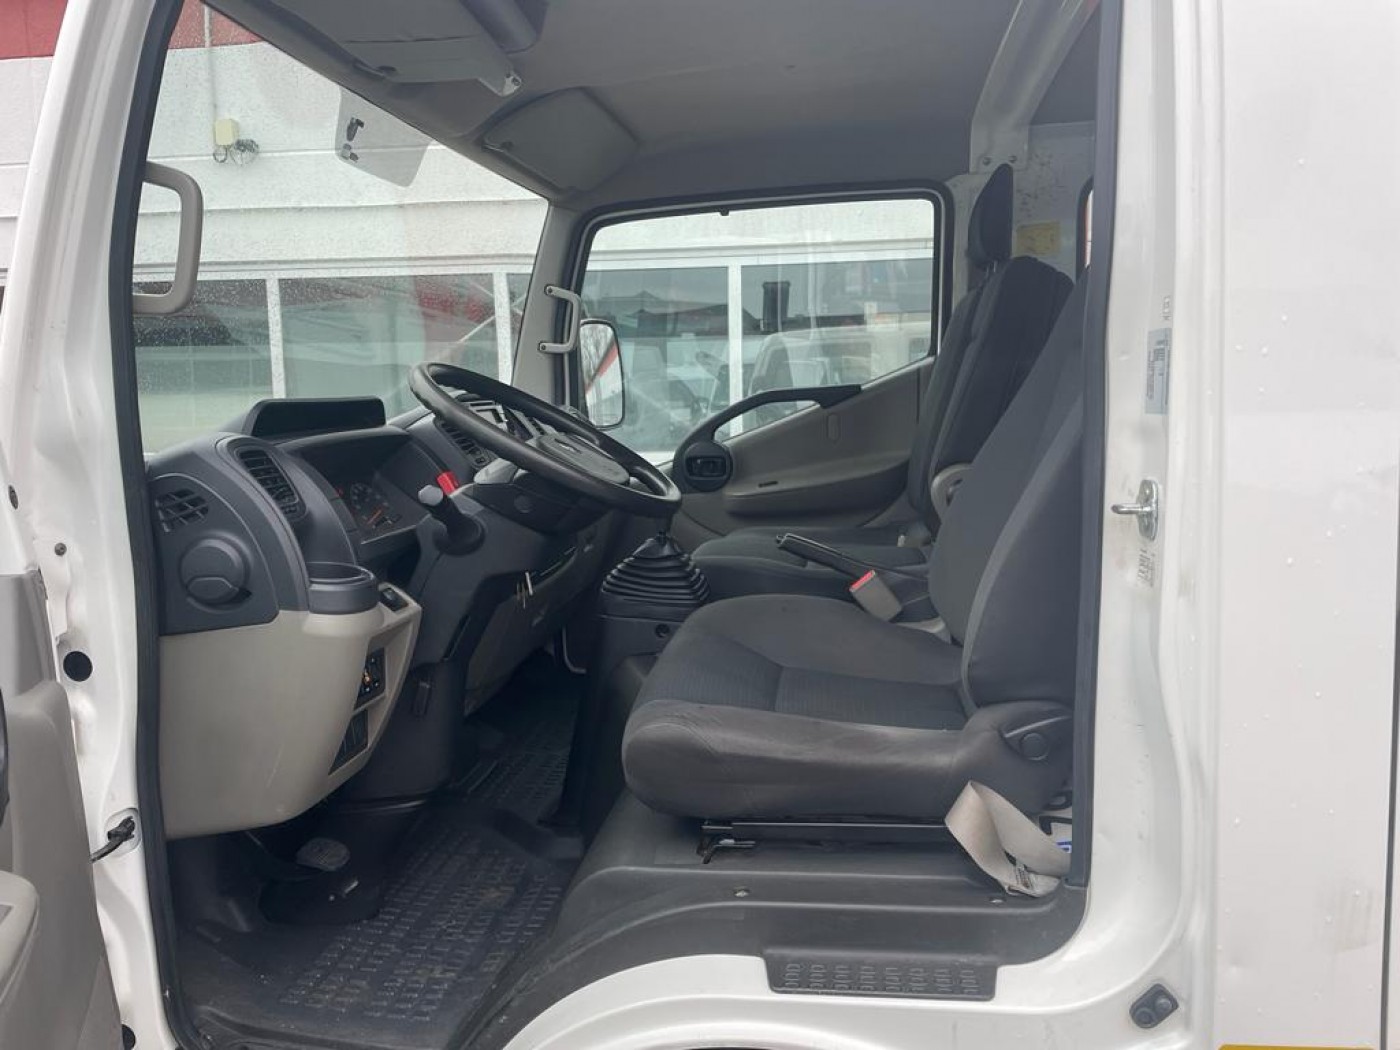 Renault Maxity tipper double cab 1100 kg Payload!